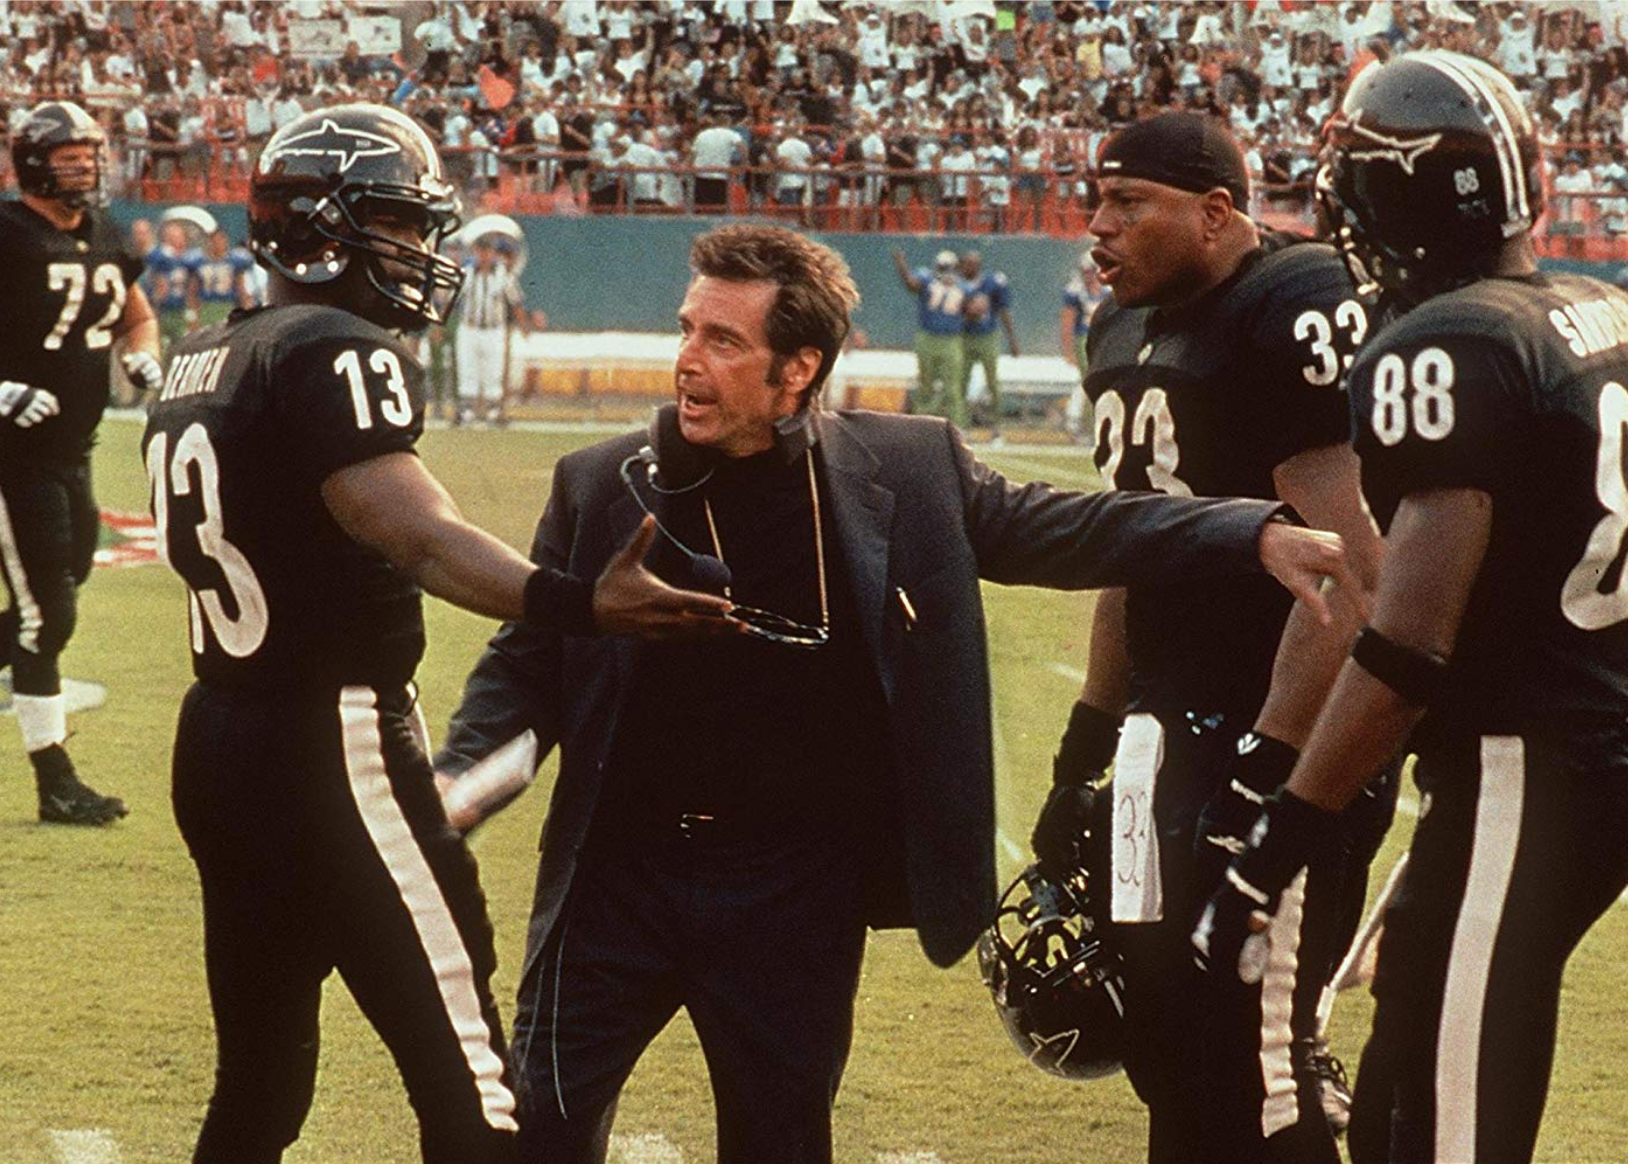 Al Pacino in a scene from 'Any Given Sunday’.